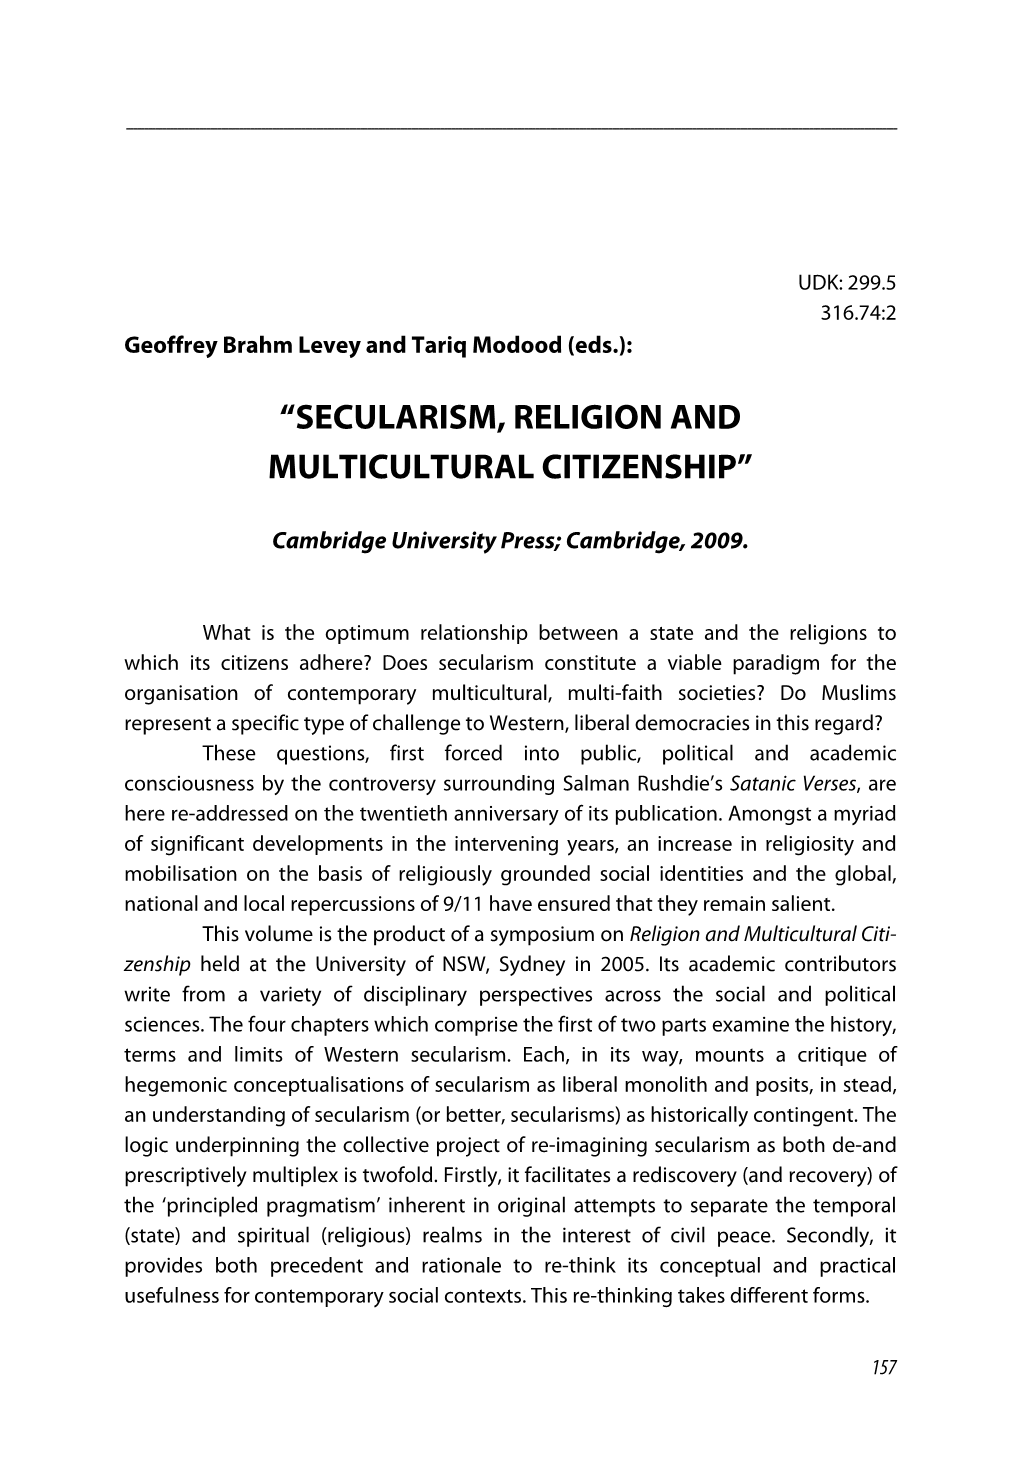 “Secularism, Religion and Multicultural Citizenship”